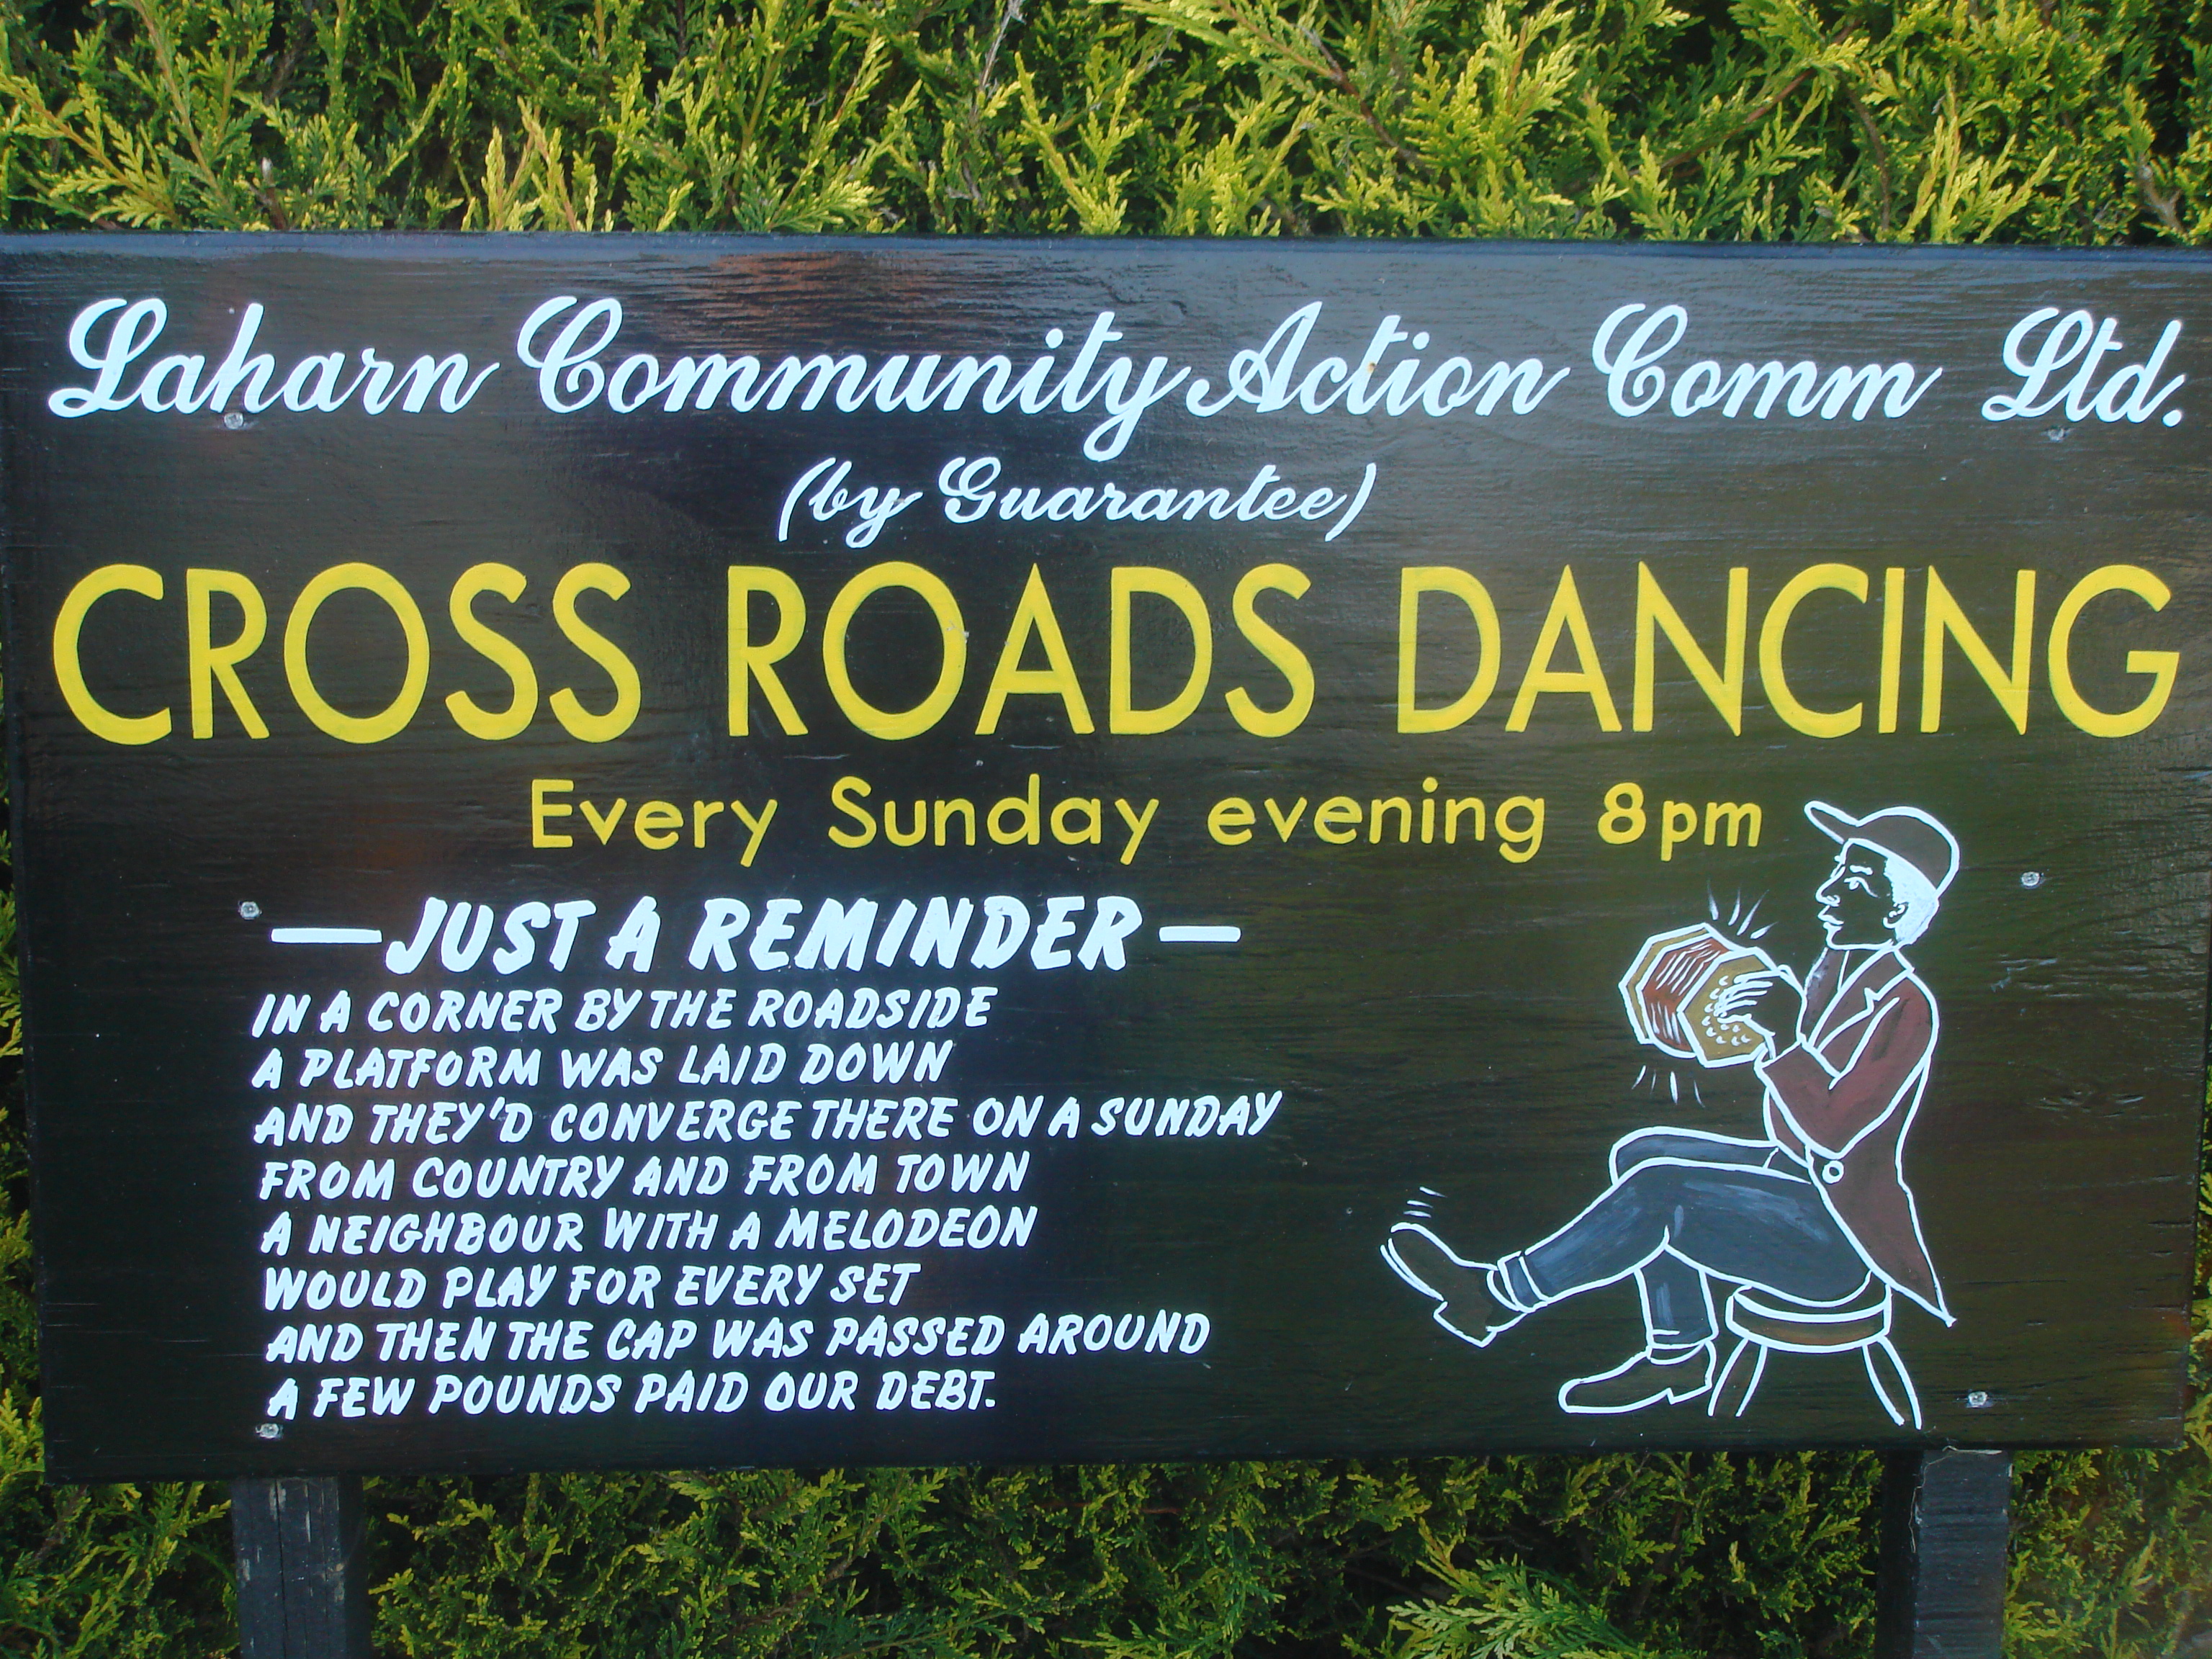 Old custom of “Dancing at the Crossroads” alive and well in North Cork